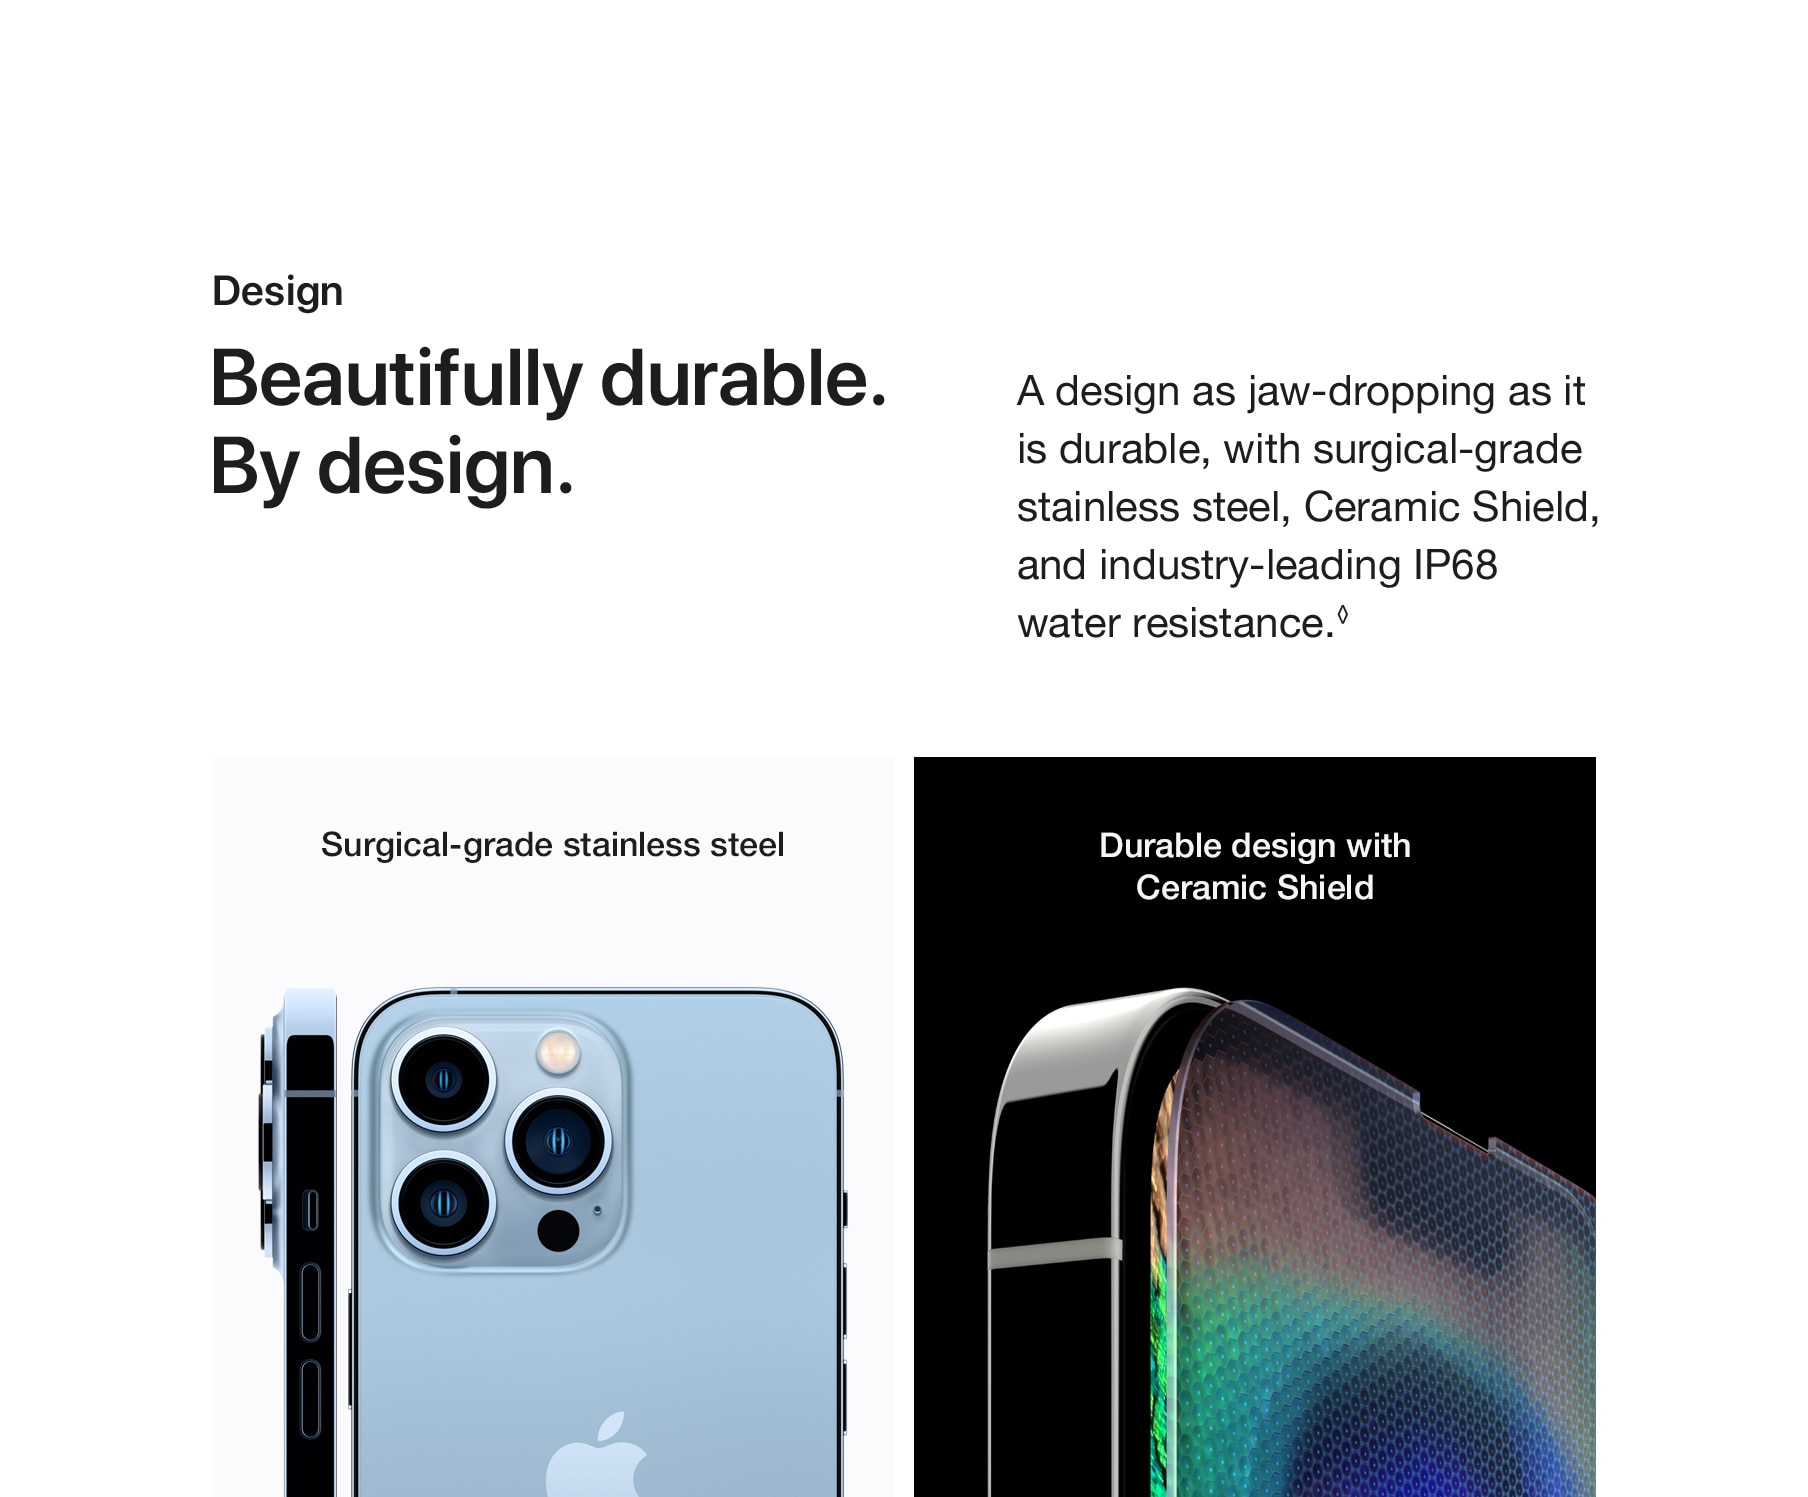 Design. Beautifully durable. By Design. A design as jaw-dropping as it is durable, with surgical-grade stainless steel, Ceramic Shield, and industry-leading IP68 water resistance.